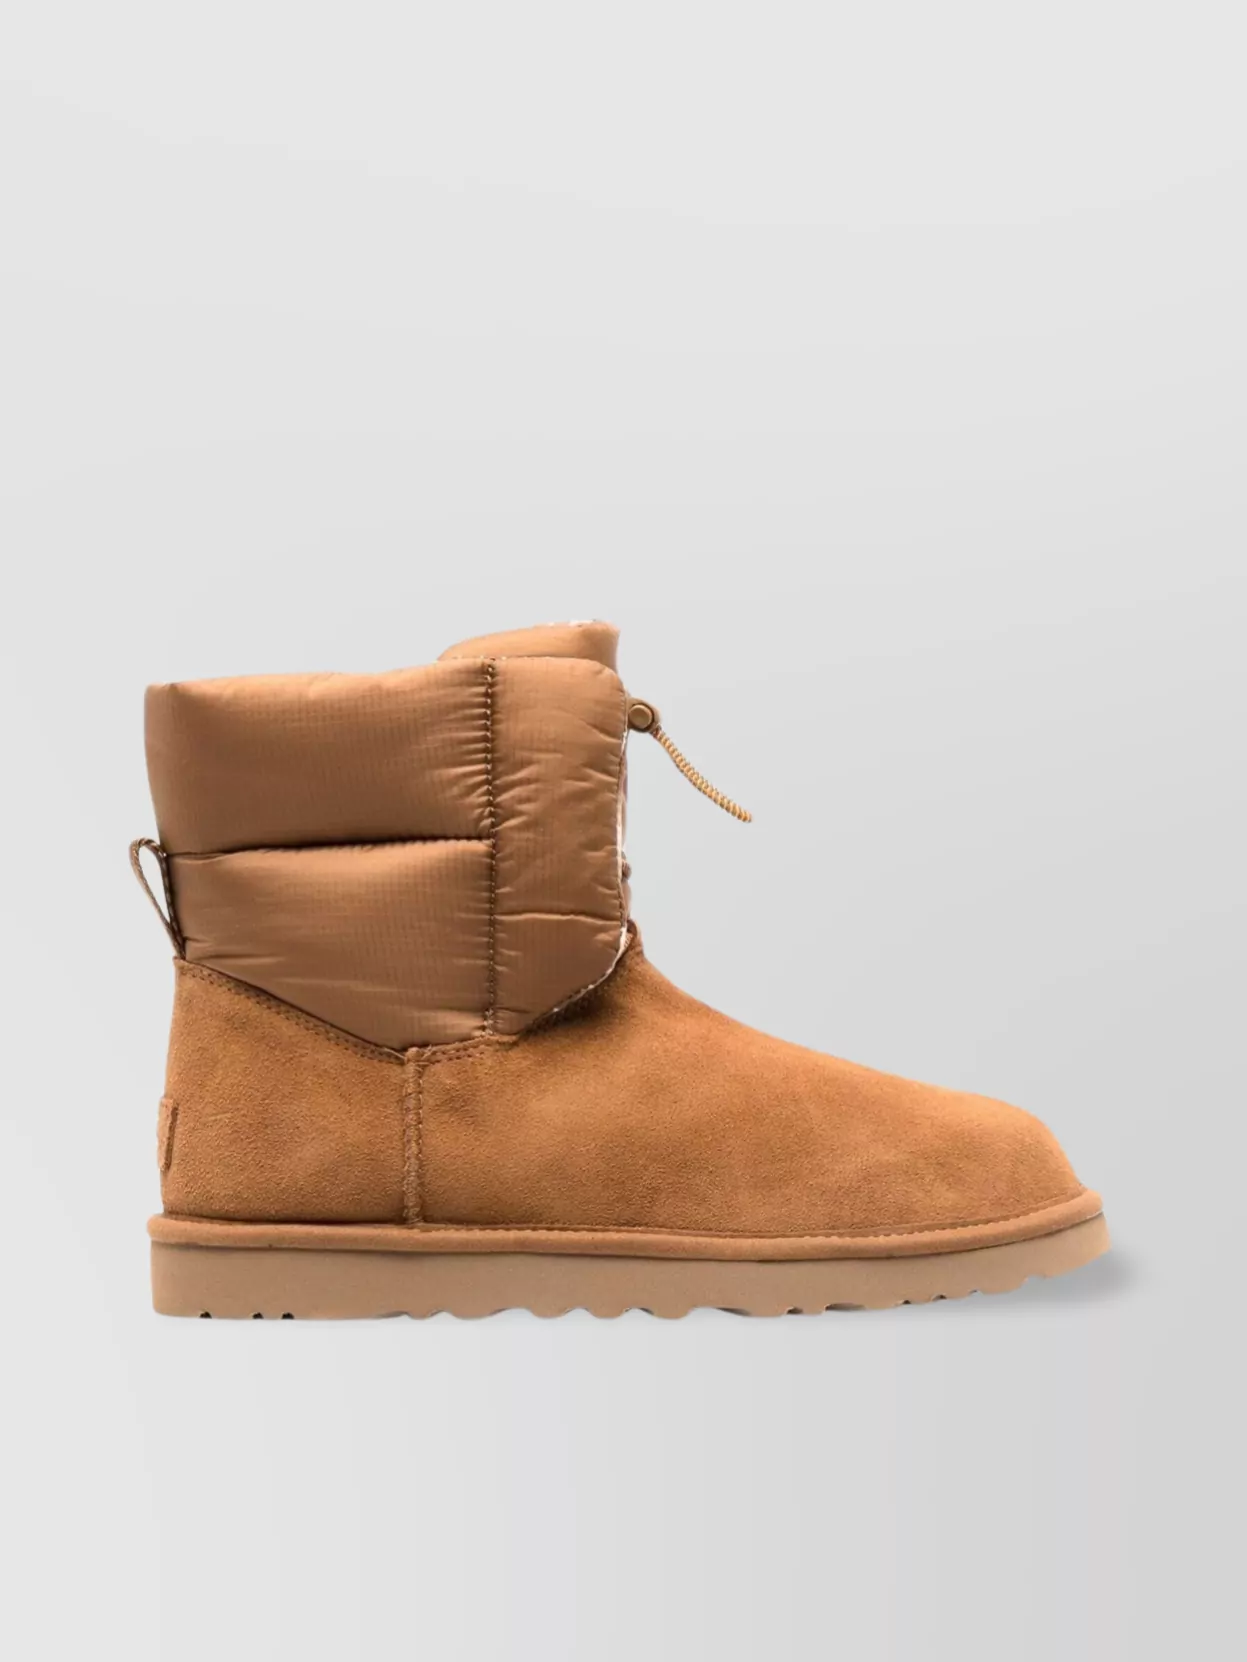 Shop Ugg Waterproof Suede Toggle Mini Boots